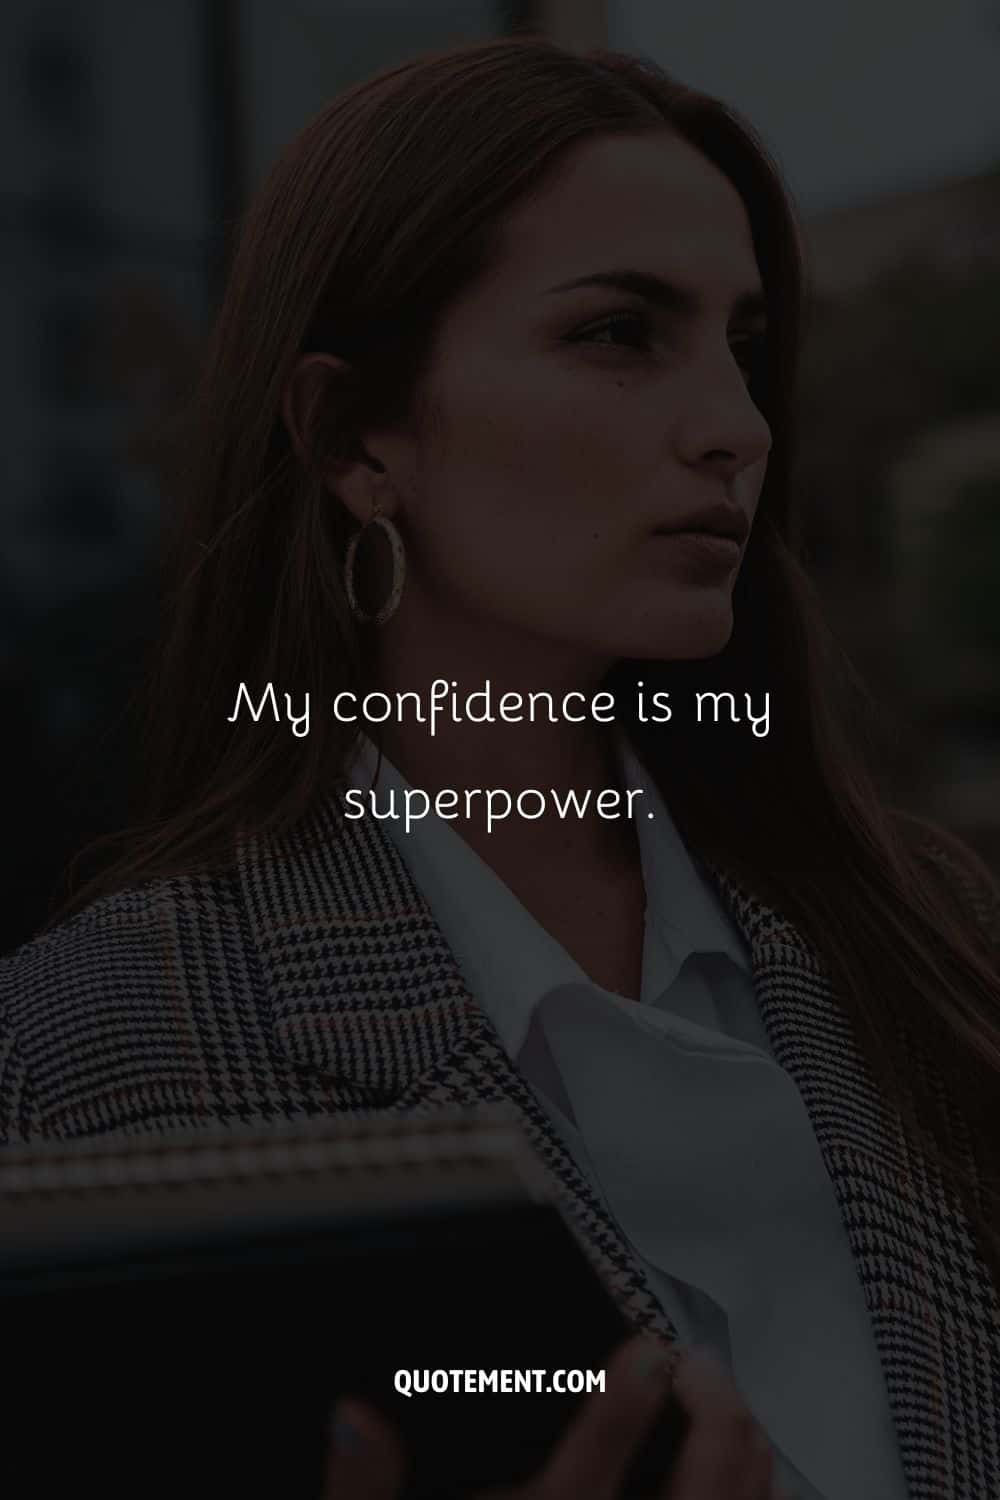 My confidence is my superpower.